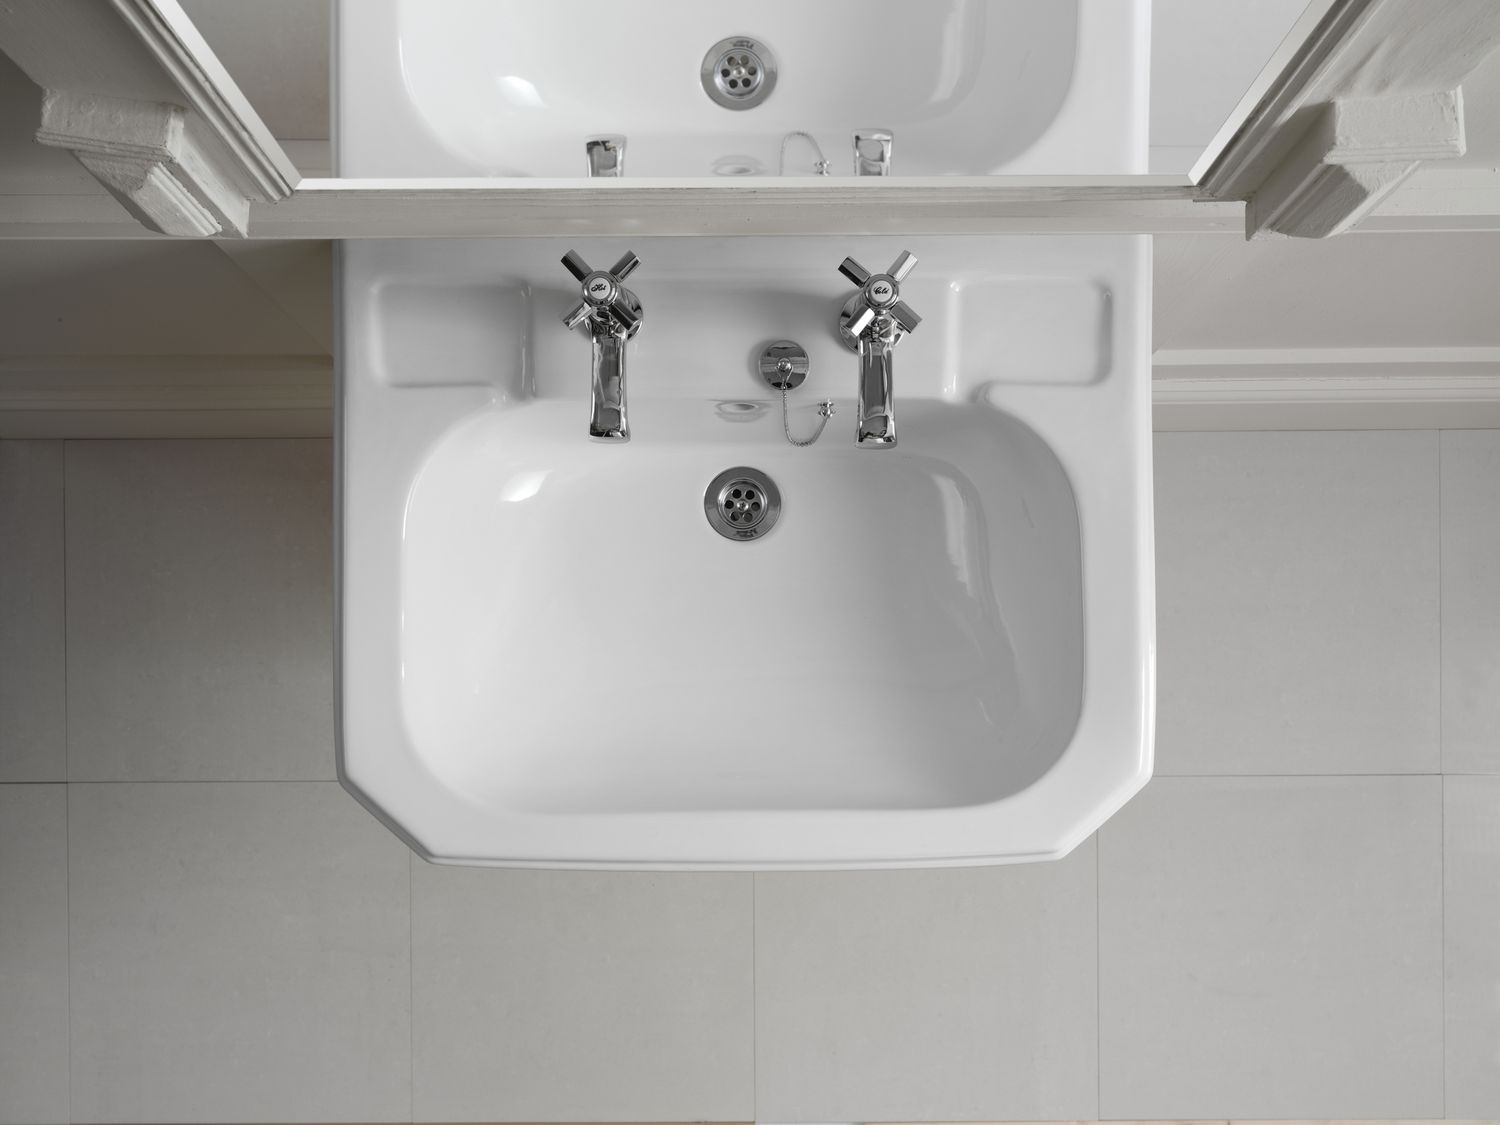 How To Install A Wall Mount Sink | Storables